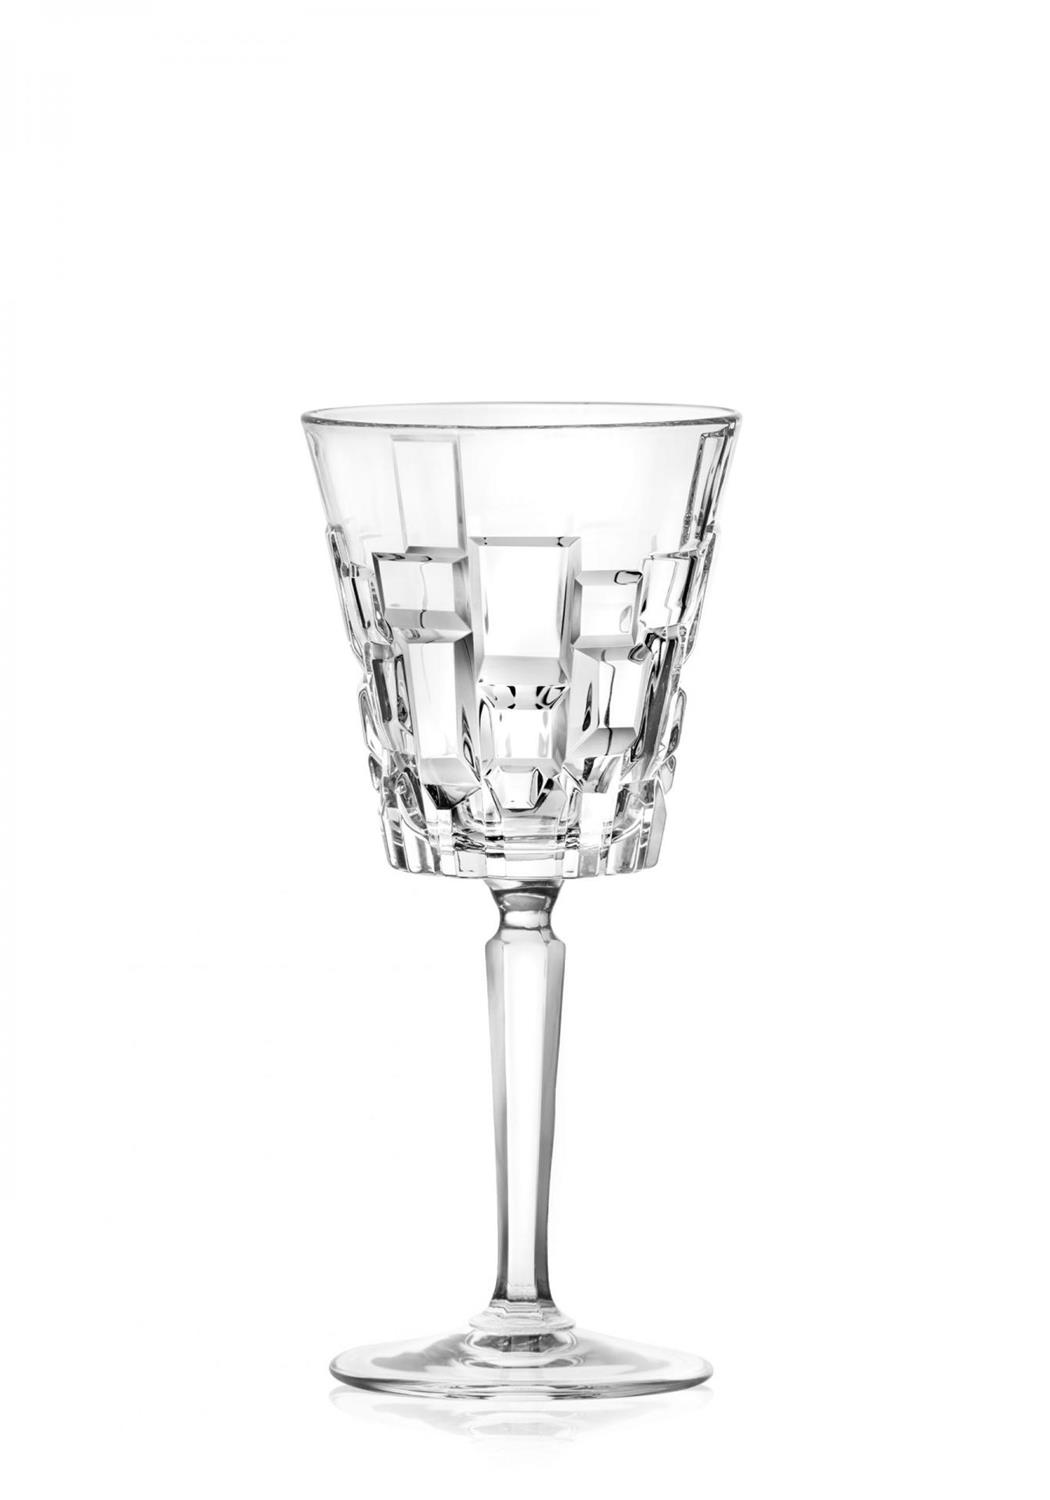 ETNA WINE/WATER GLASS 20cl LUXION PROFESSIONAL ITALY